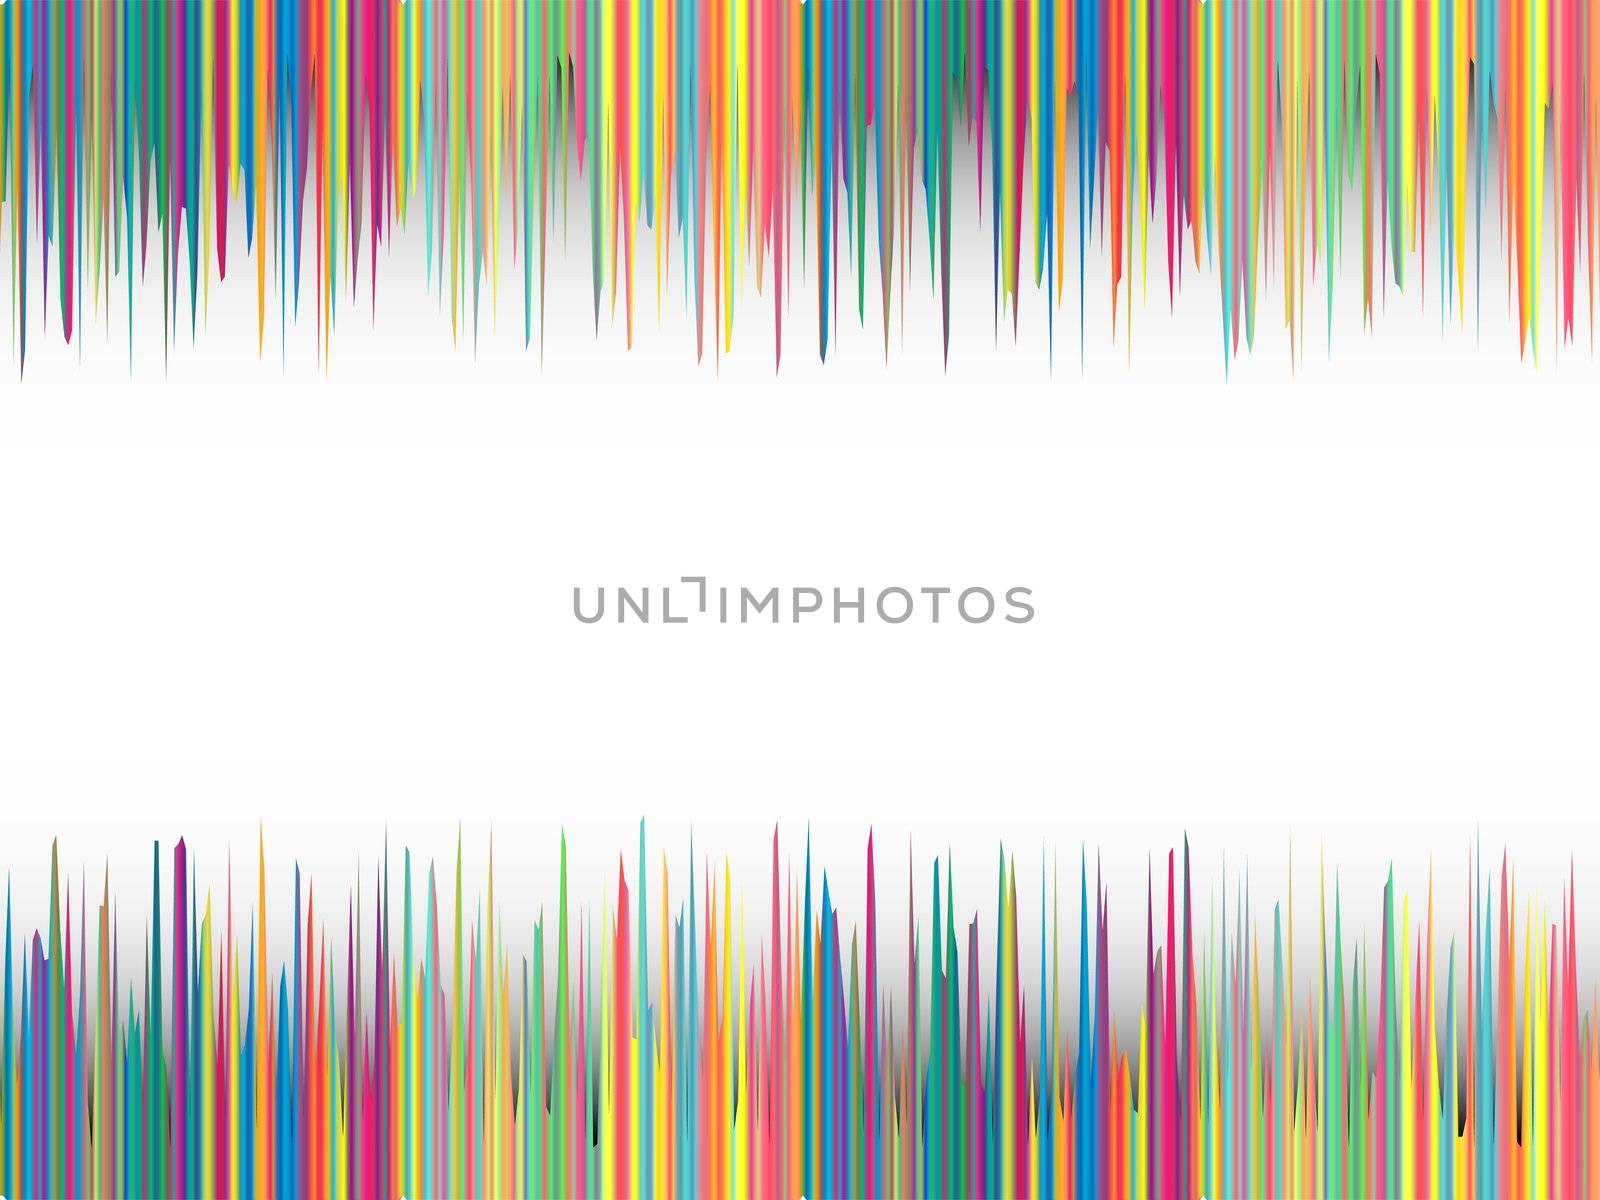 colorful striped background, abstract vector art illustration